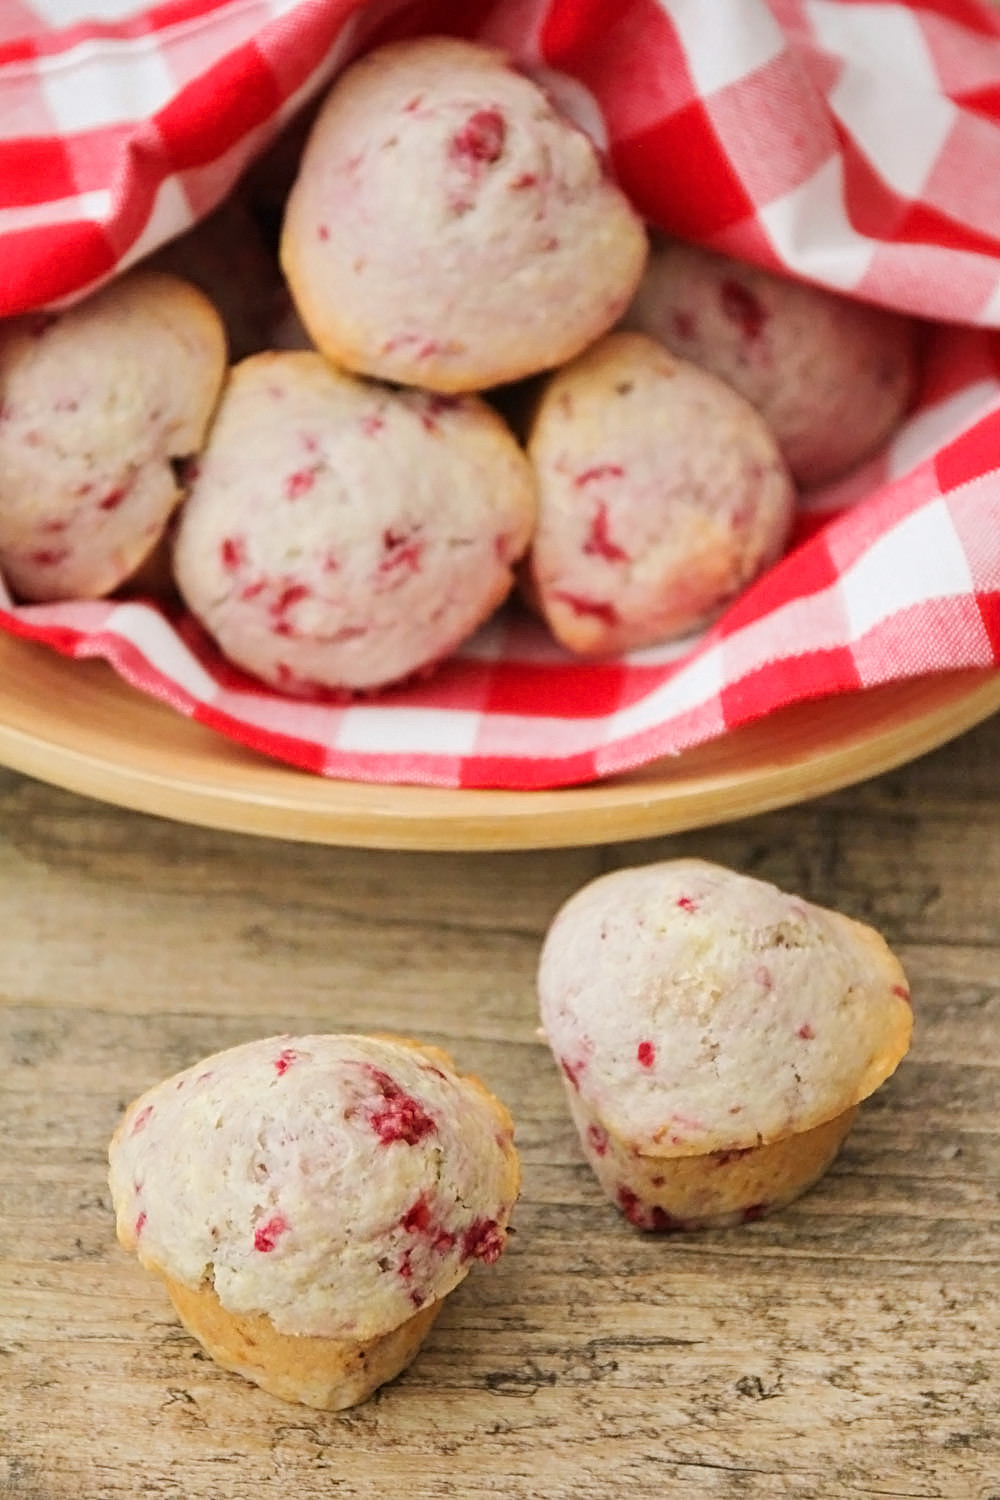 These raspberry almond heart muffins are adorable and super delicious! Perfect for sharing with your sweetheart!